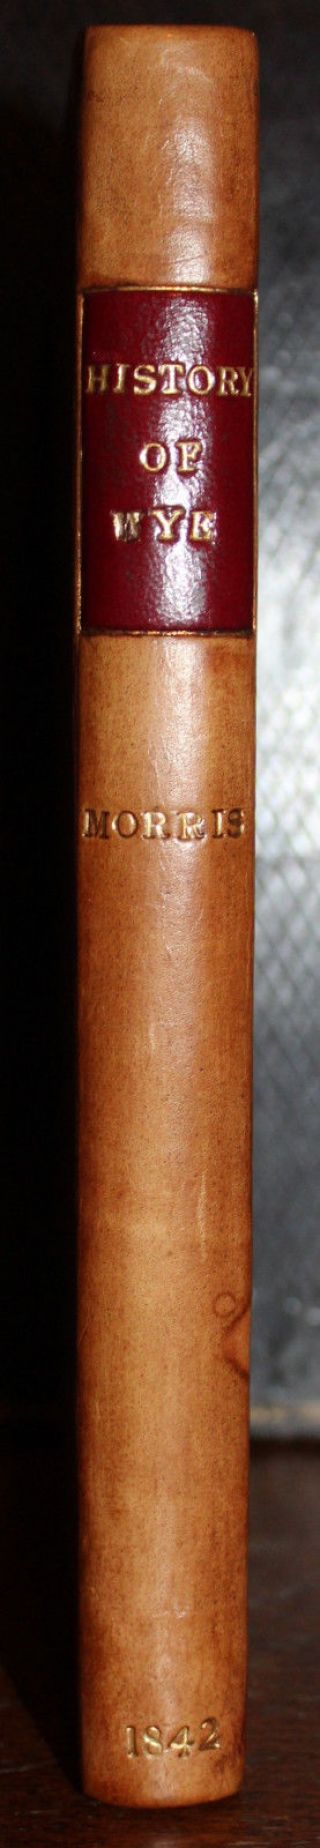 1842 The History And Topography Of Wye William S Morris First Edition 7 Plates